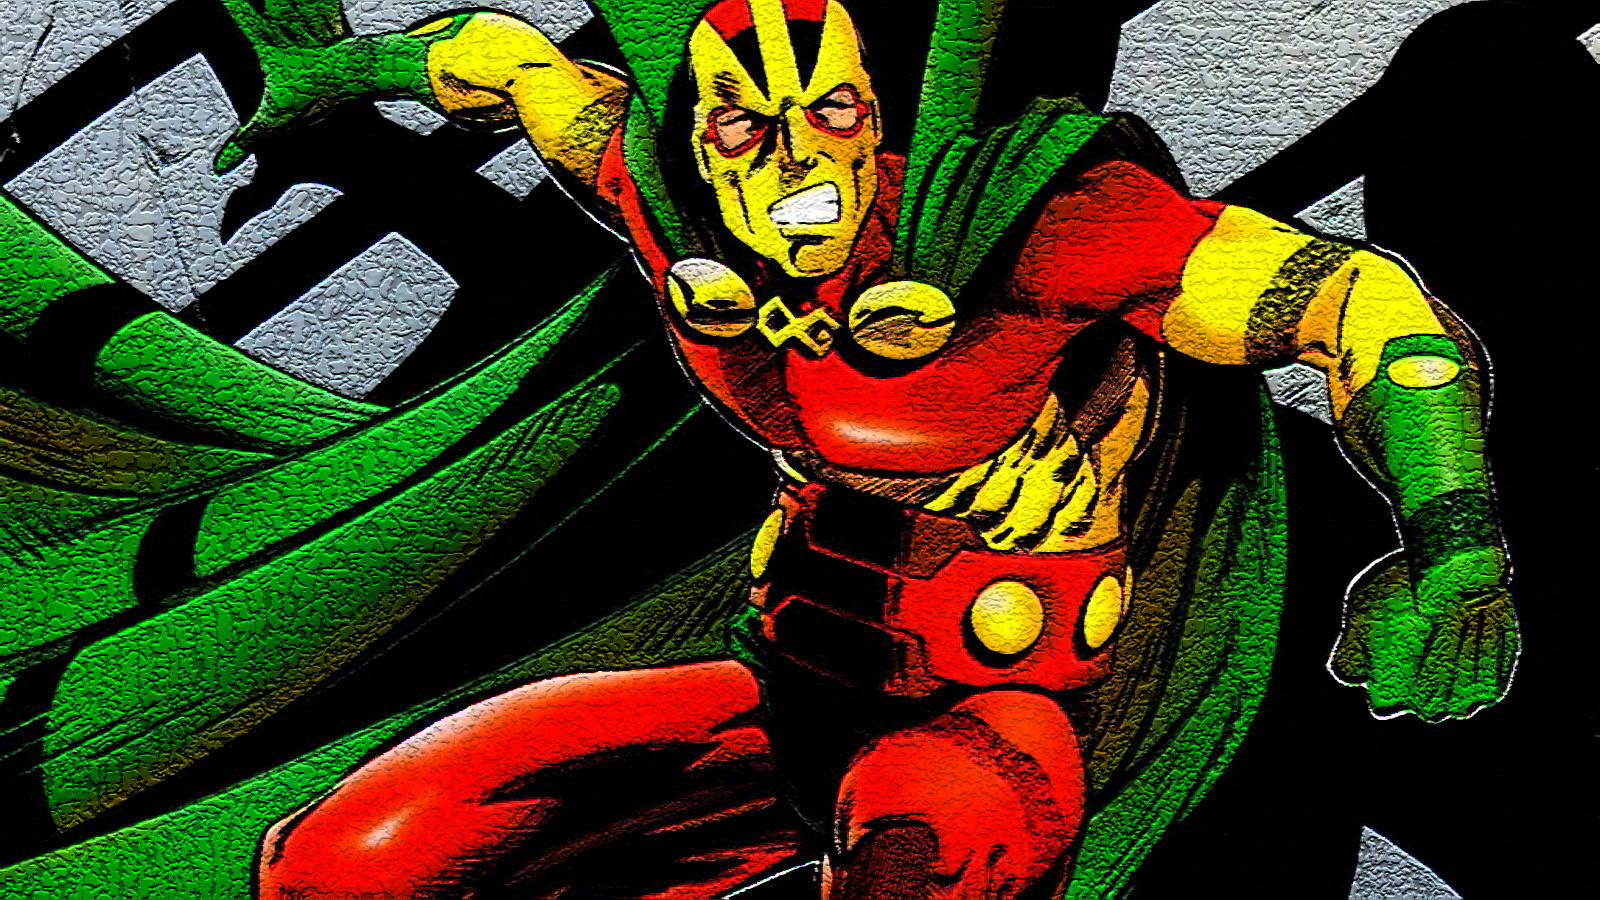 Mr miracle Picture - Image Abyss